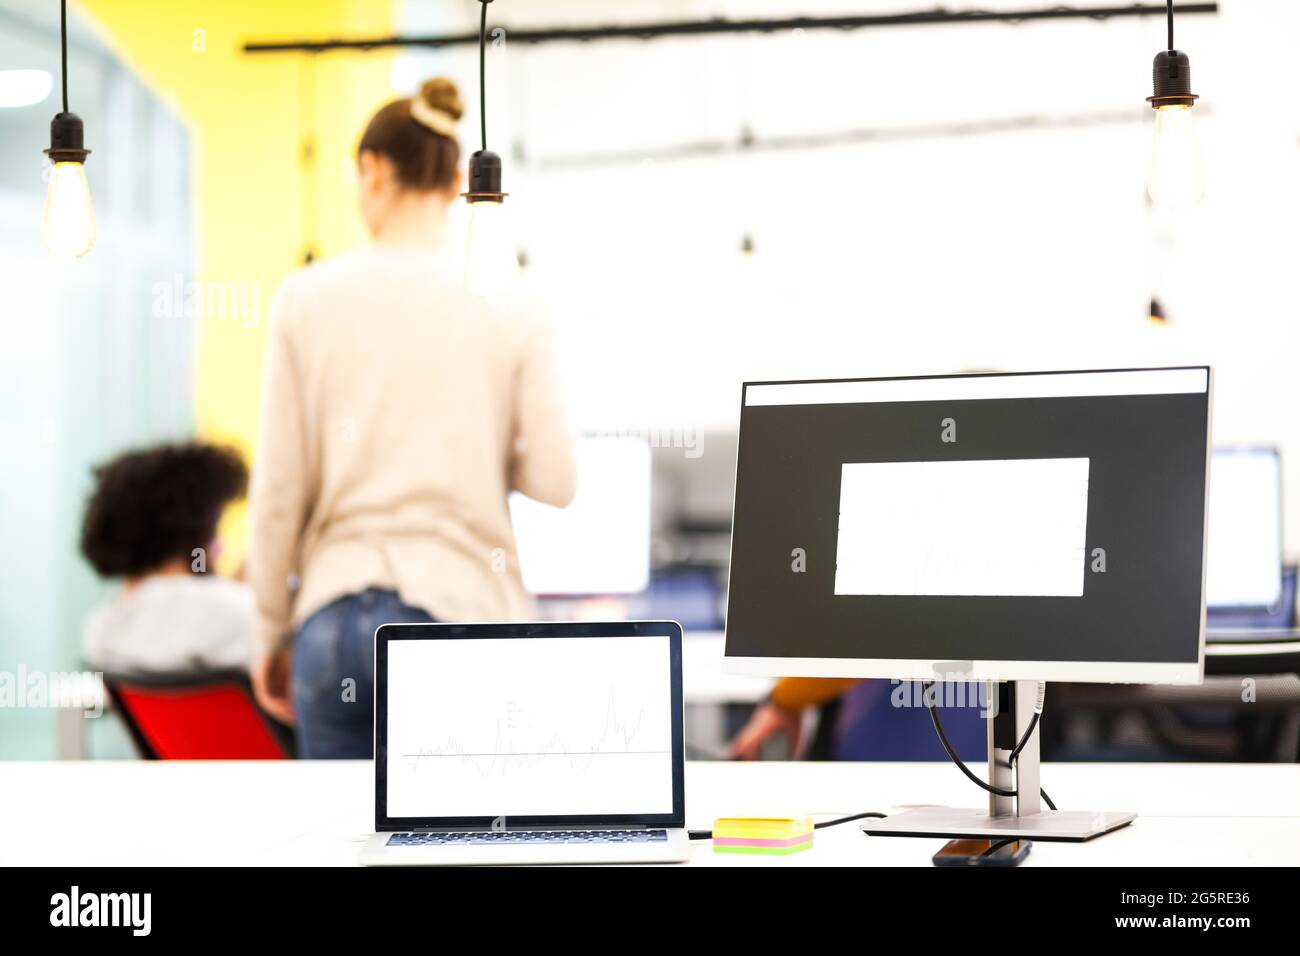 Laptop computer and desktop monitor showing graphs in a modern work space Stock Photo